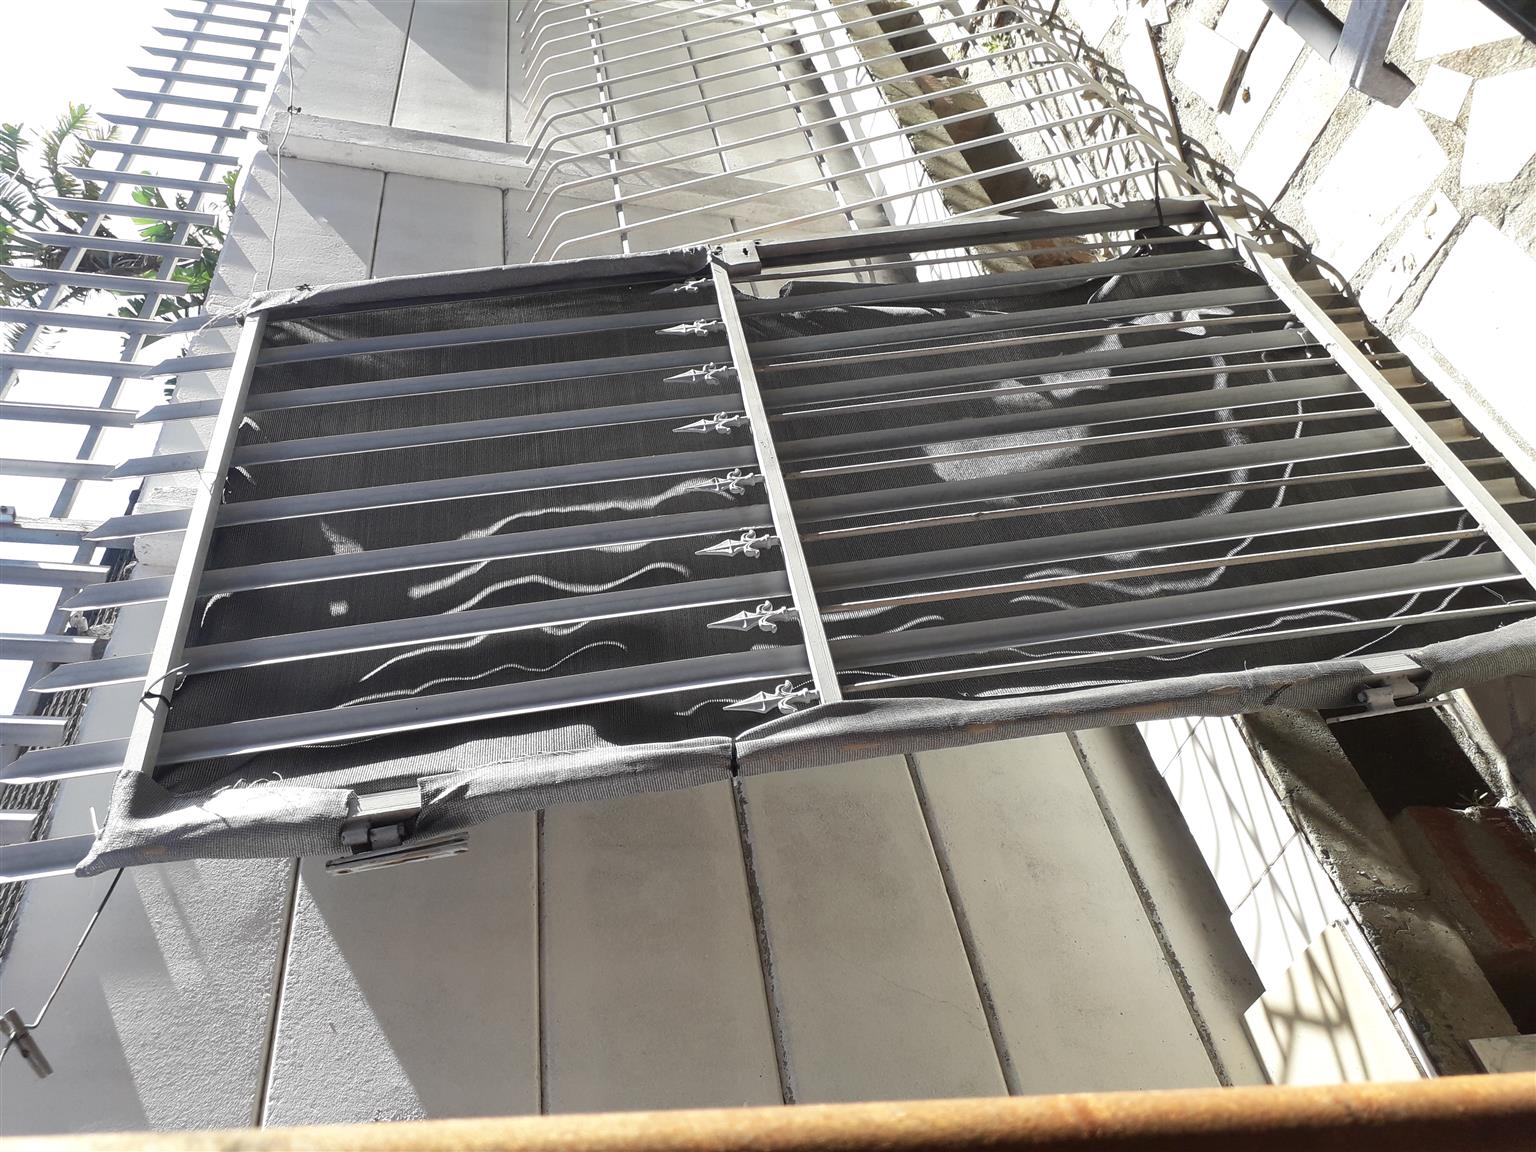 Heavy Duty Galvanized Gate includes Hinges & Lock In good condition: 120cm x 205cm:  